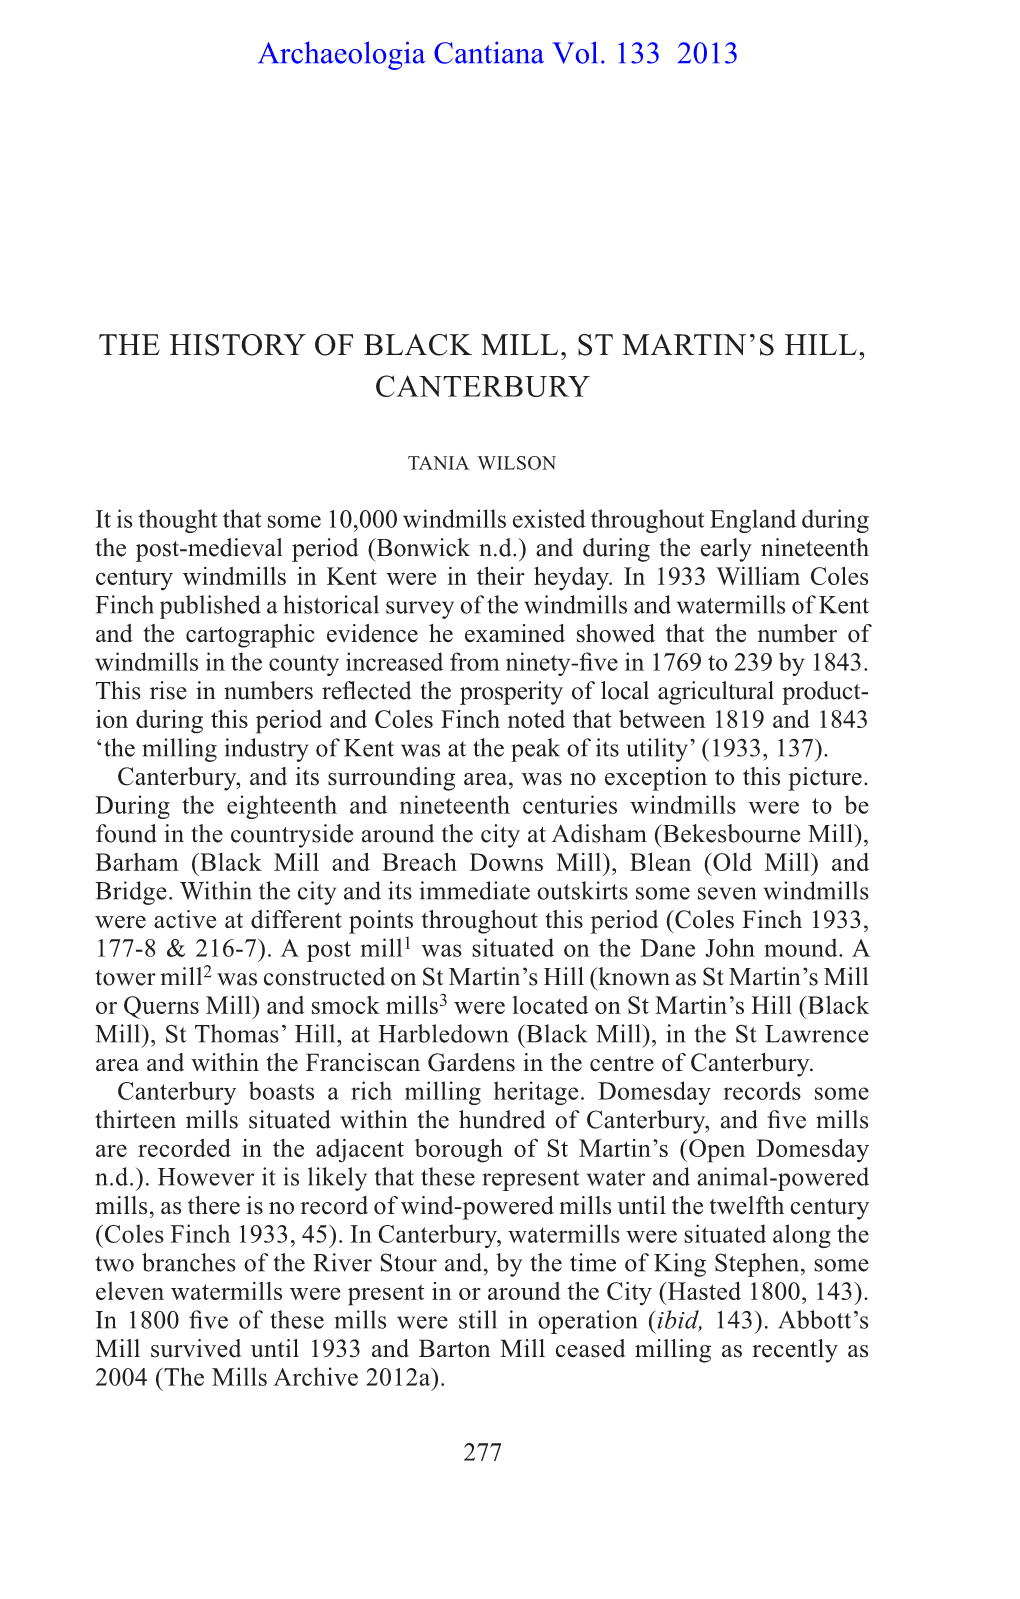 The History of Black Mill, St Martin's Hill, Canterbury